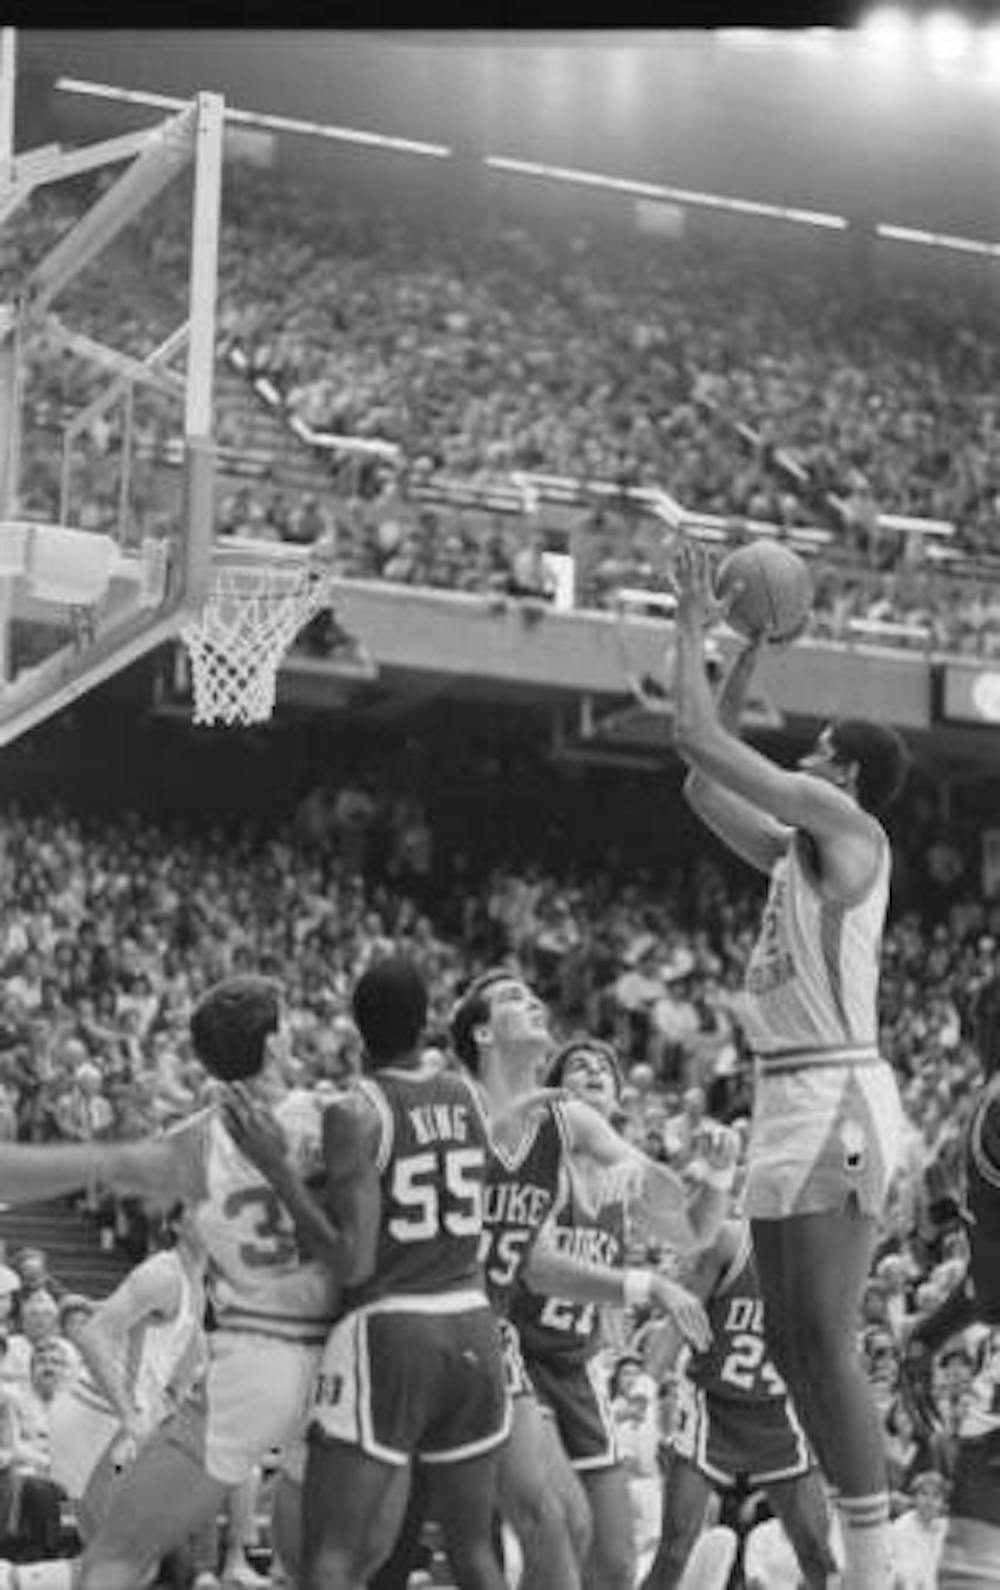 <p>Action shot during UNC v. Duke basketball game at opening of Dean Smith Activities Center, Chapel Hill, NC; UNC beat Duke 95-92. UNC's Brad Daugherty #42 going up for shot.</p>
<p>UNC v. Duke basketball, opening of Smith Center, in the Hugh Morton Photographs and Films #P0081, copyright January 18, 1986, North Carolina Collection, University of North Carolina at Chapel Hill Library.</p>